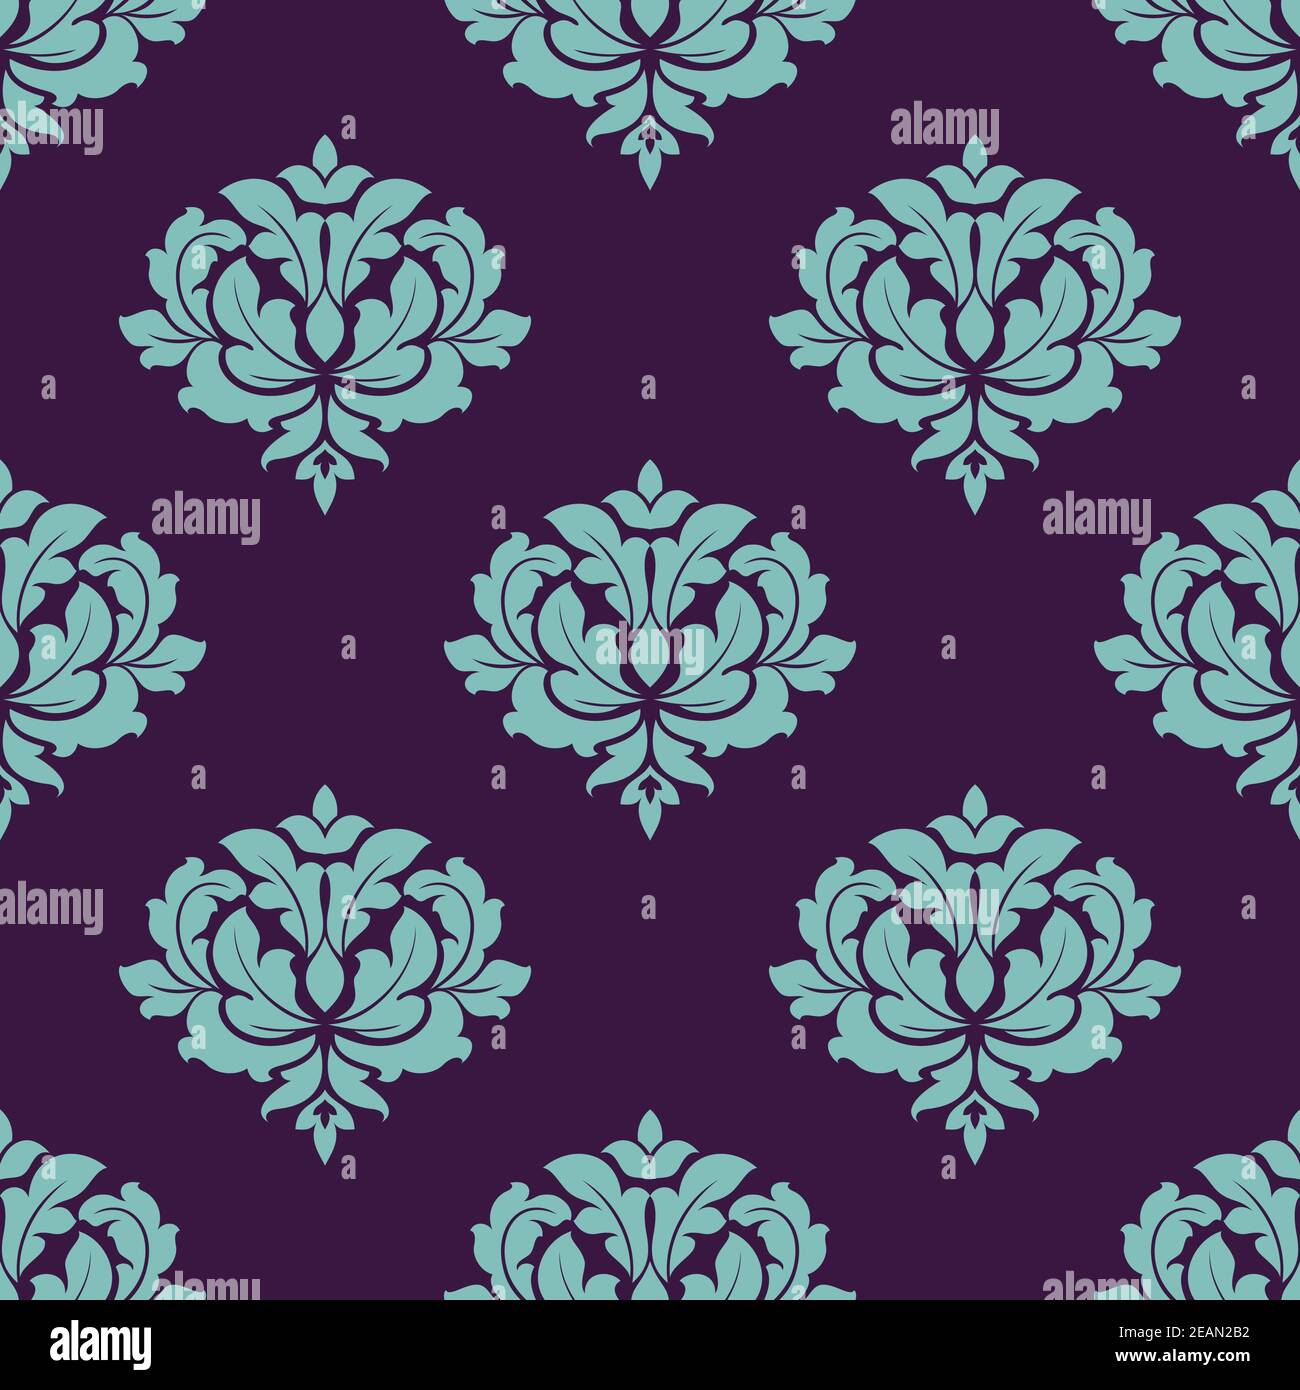 Turquoise colored floral seamless pattern in damask style motifs suitable for wallpaper, tiles and fabric design isolated on dark crimson colored back Stock Vector